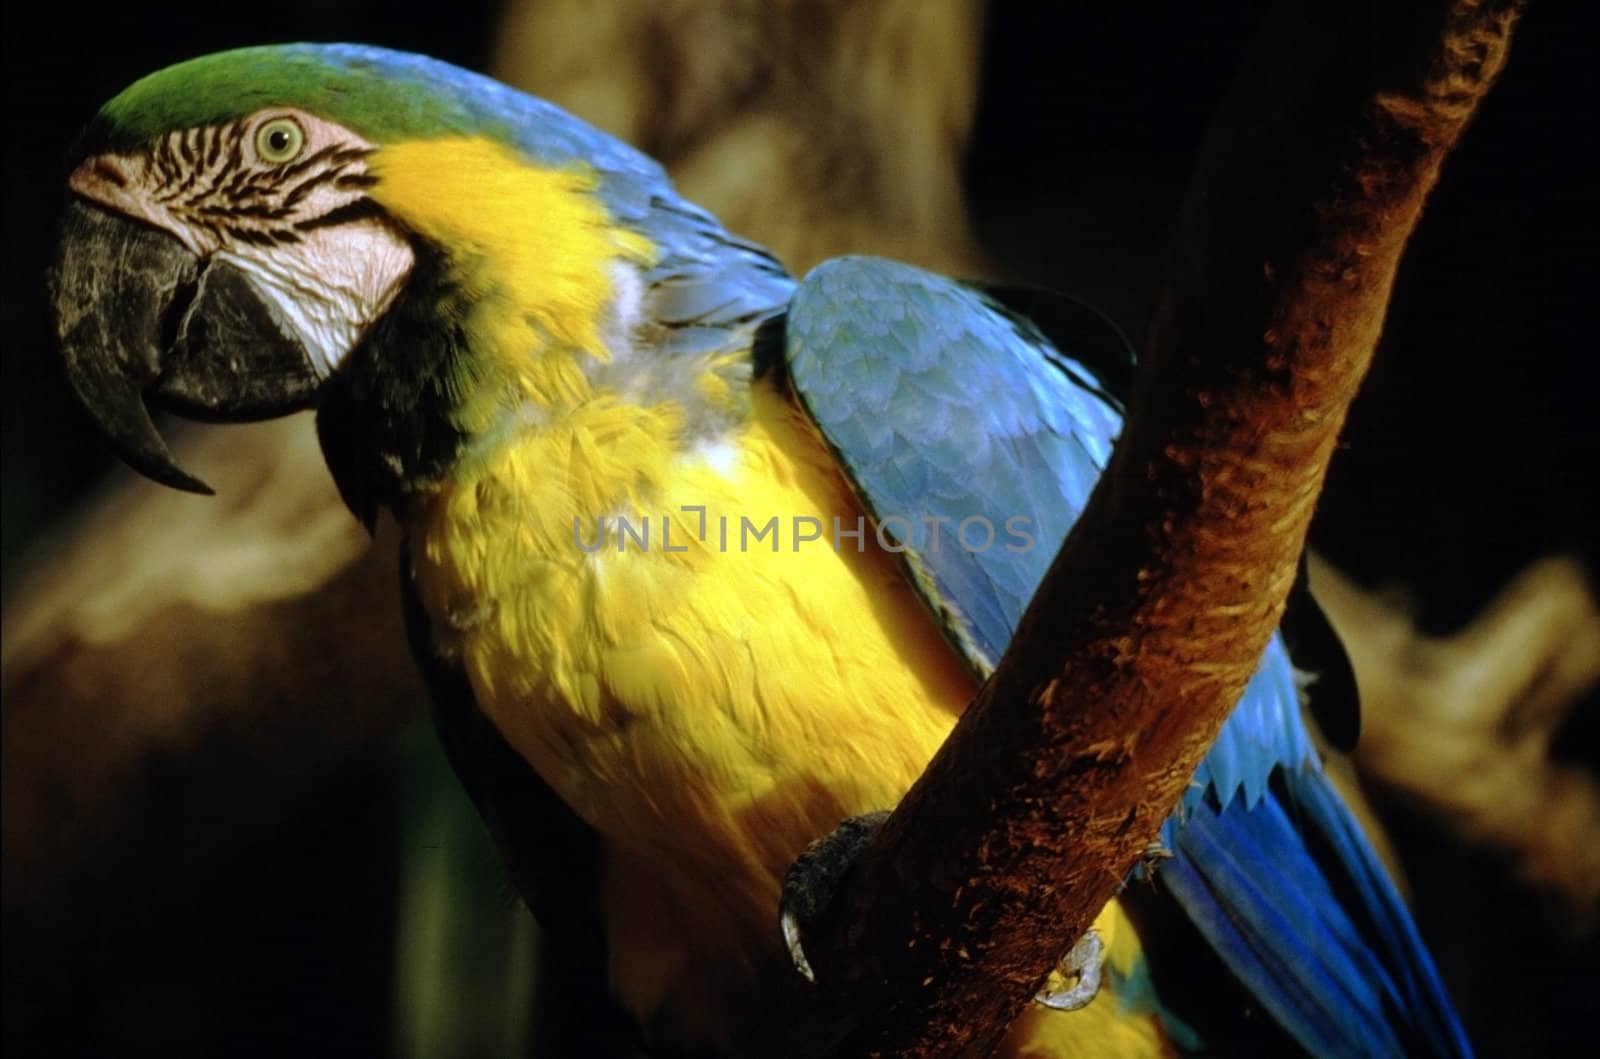 Blue and yellow Macaw by jol66